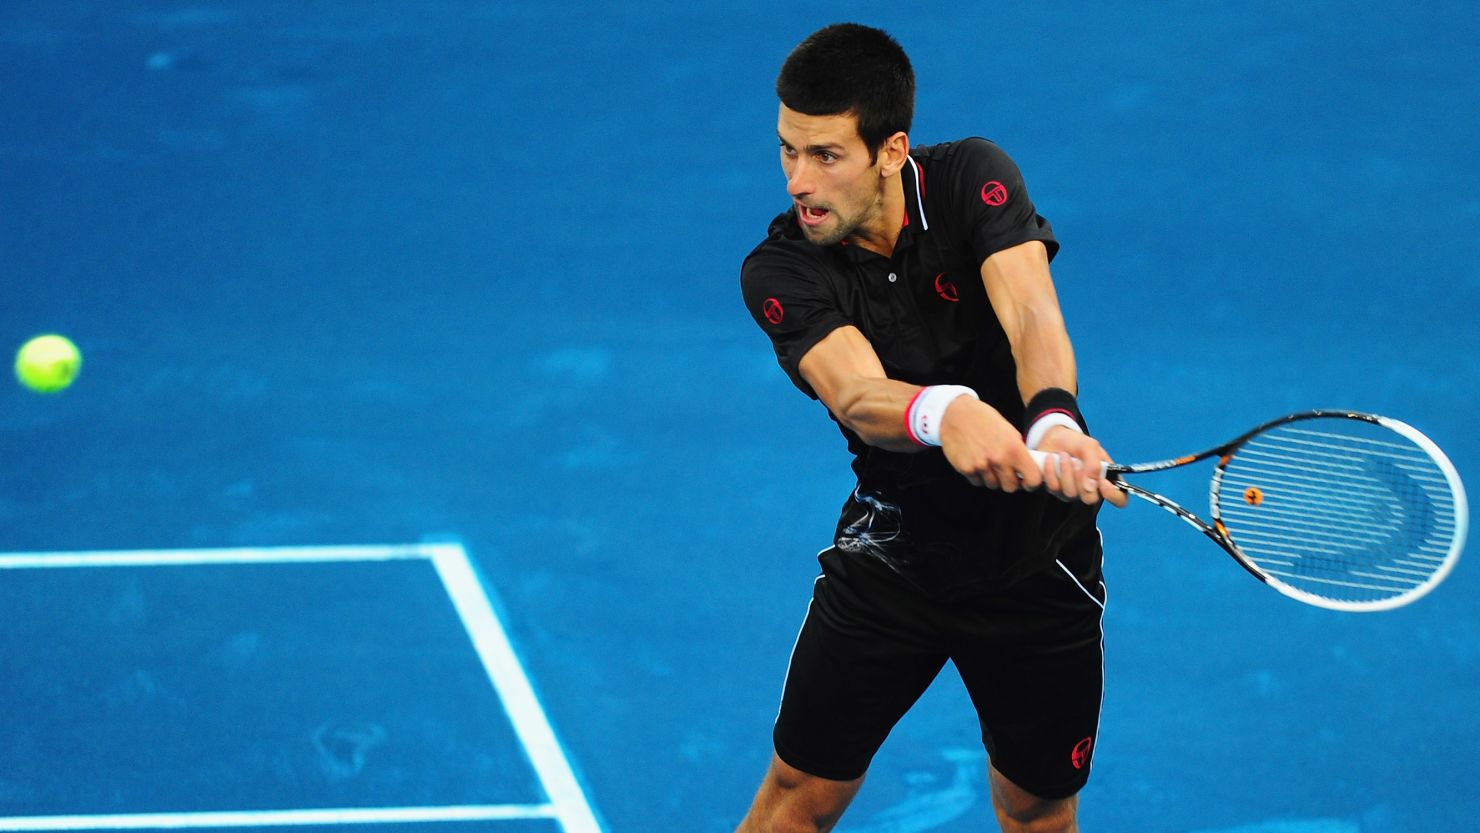 World No. 1 Novak Djokovic got his first taste of the blue clay at the Madrid Masters on Tuesday